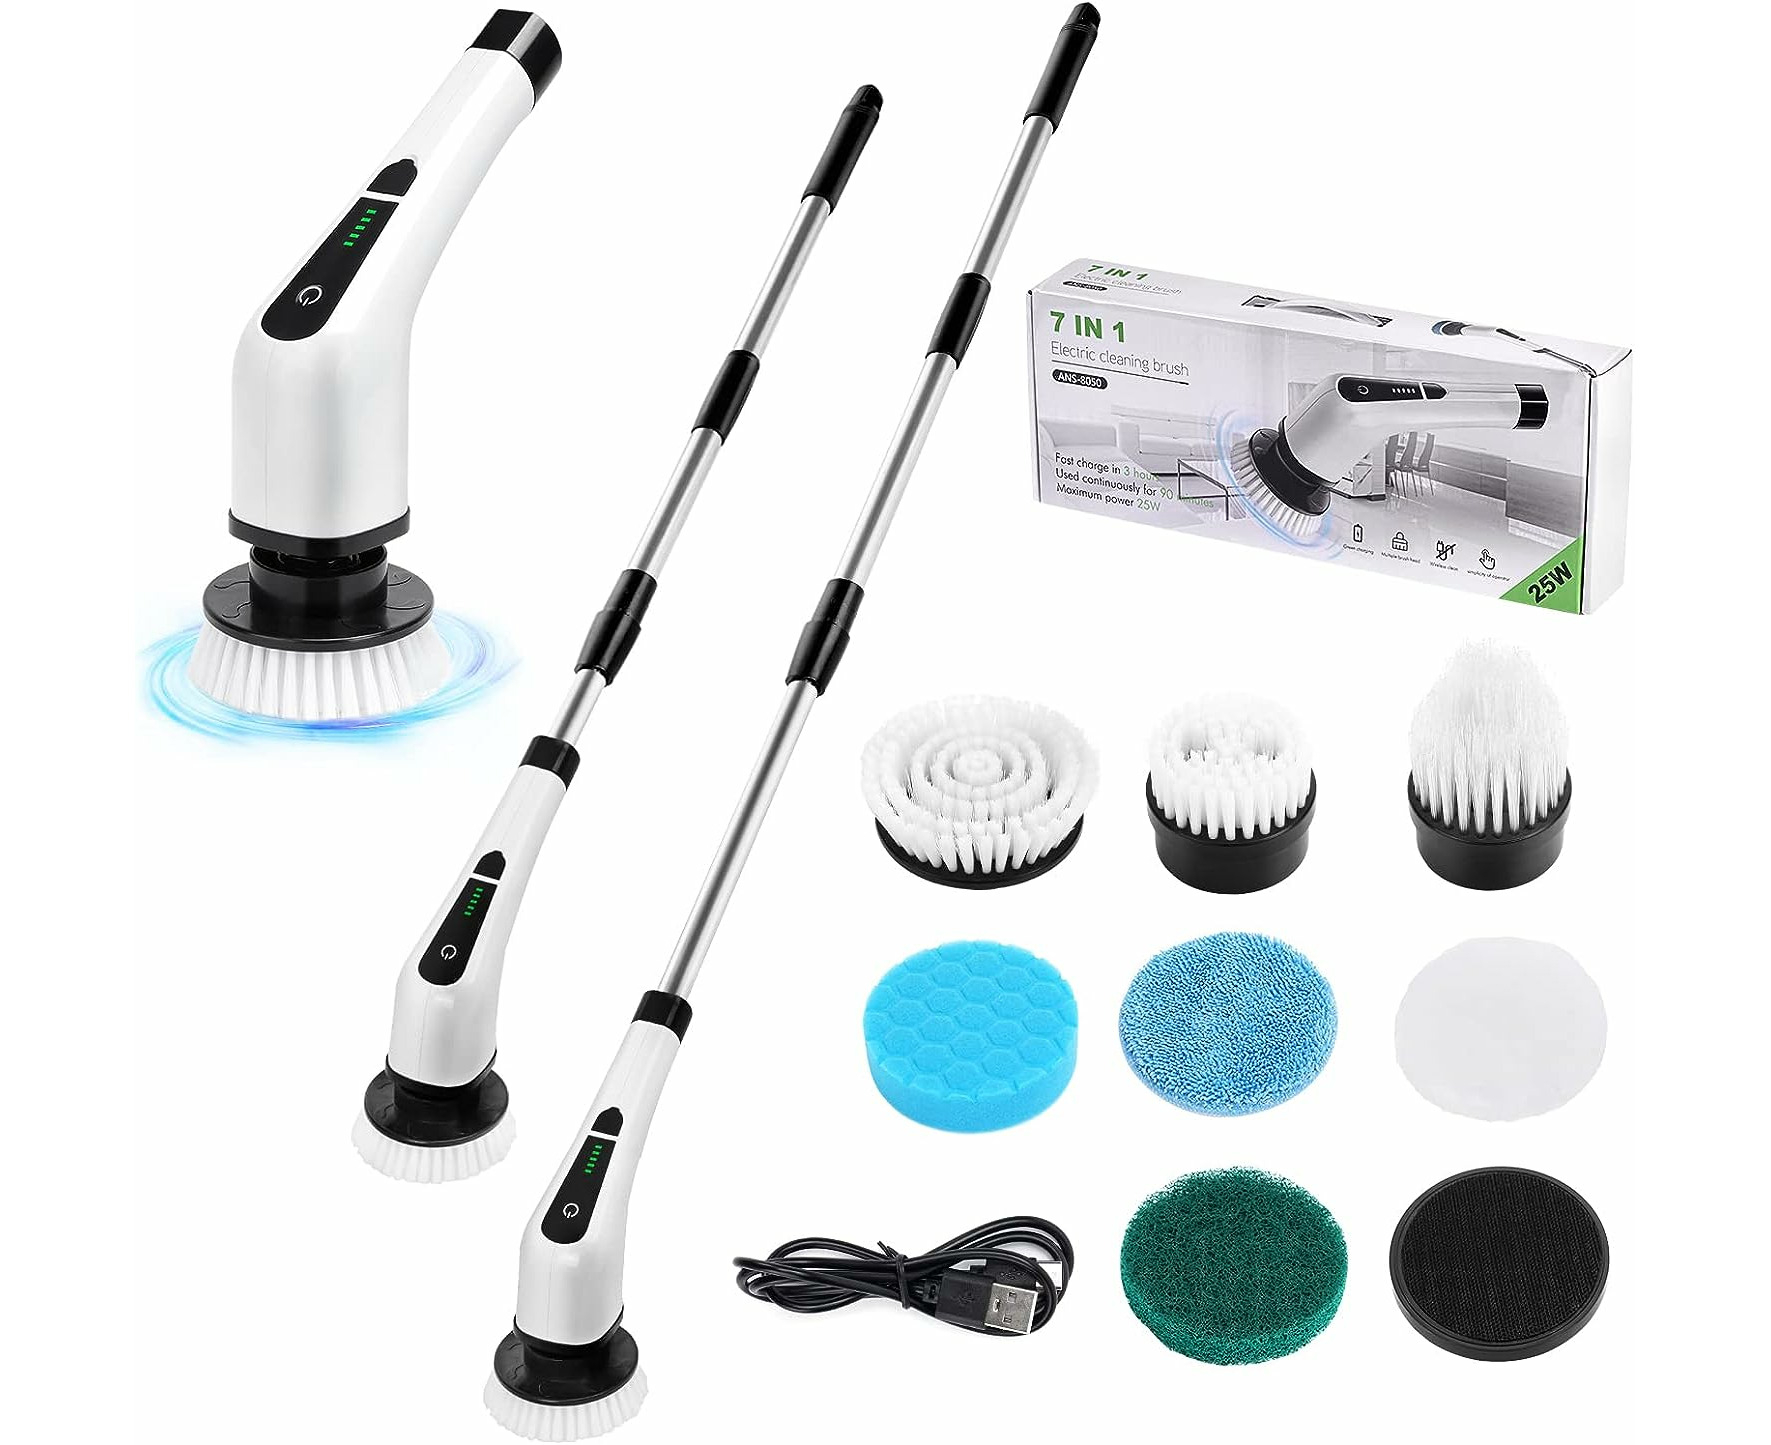 Exfeeko Electric Spin Scrubber, Cordless Bath Tub Power Scrubber with Long Handle & 7 Replaceable Heads, Detachable As Short Handle, Shower Cleaning